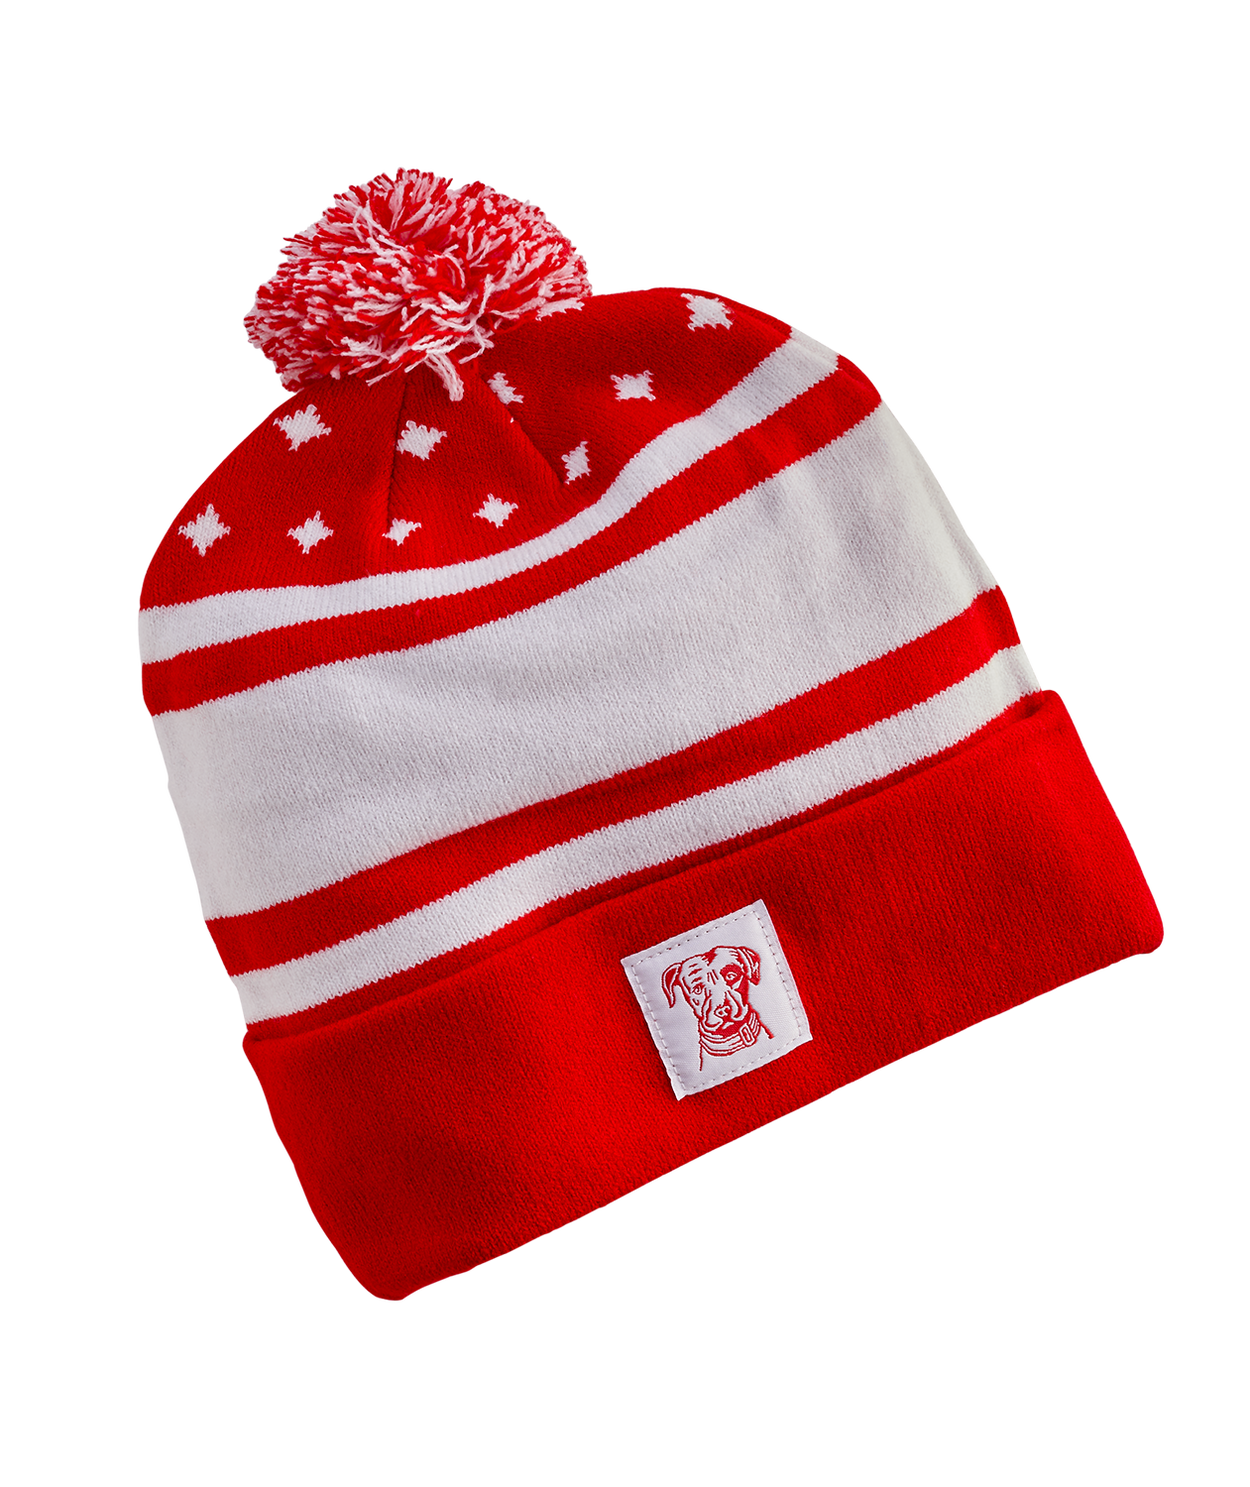 “A festive winter hat featuring a holiday-themed design and a pom-pom. Made with premium quality knit, it offers warmth and coziness. Embroidered with the Lagunitas logo, this stylish accessory is perfect for cold weather and makes a great gift for beer enthusiasts”